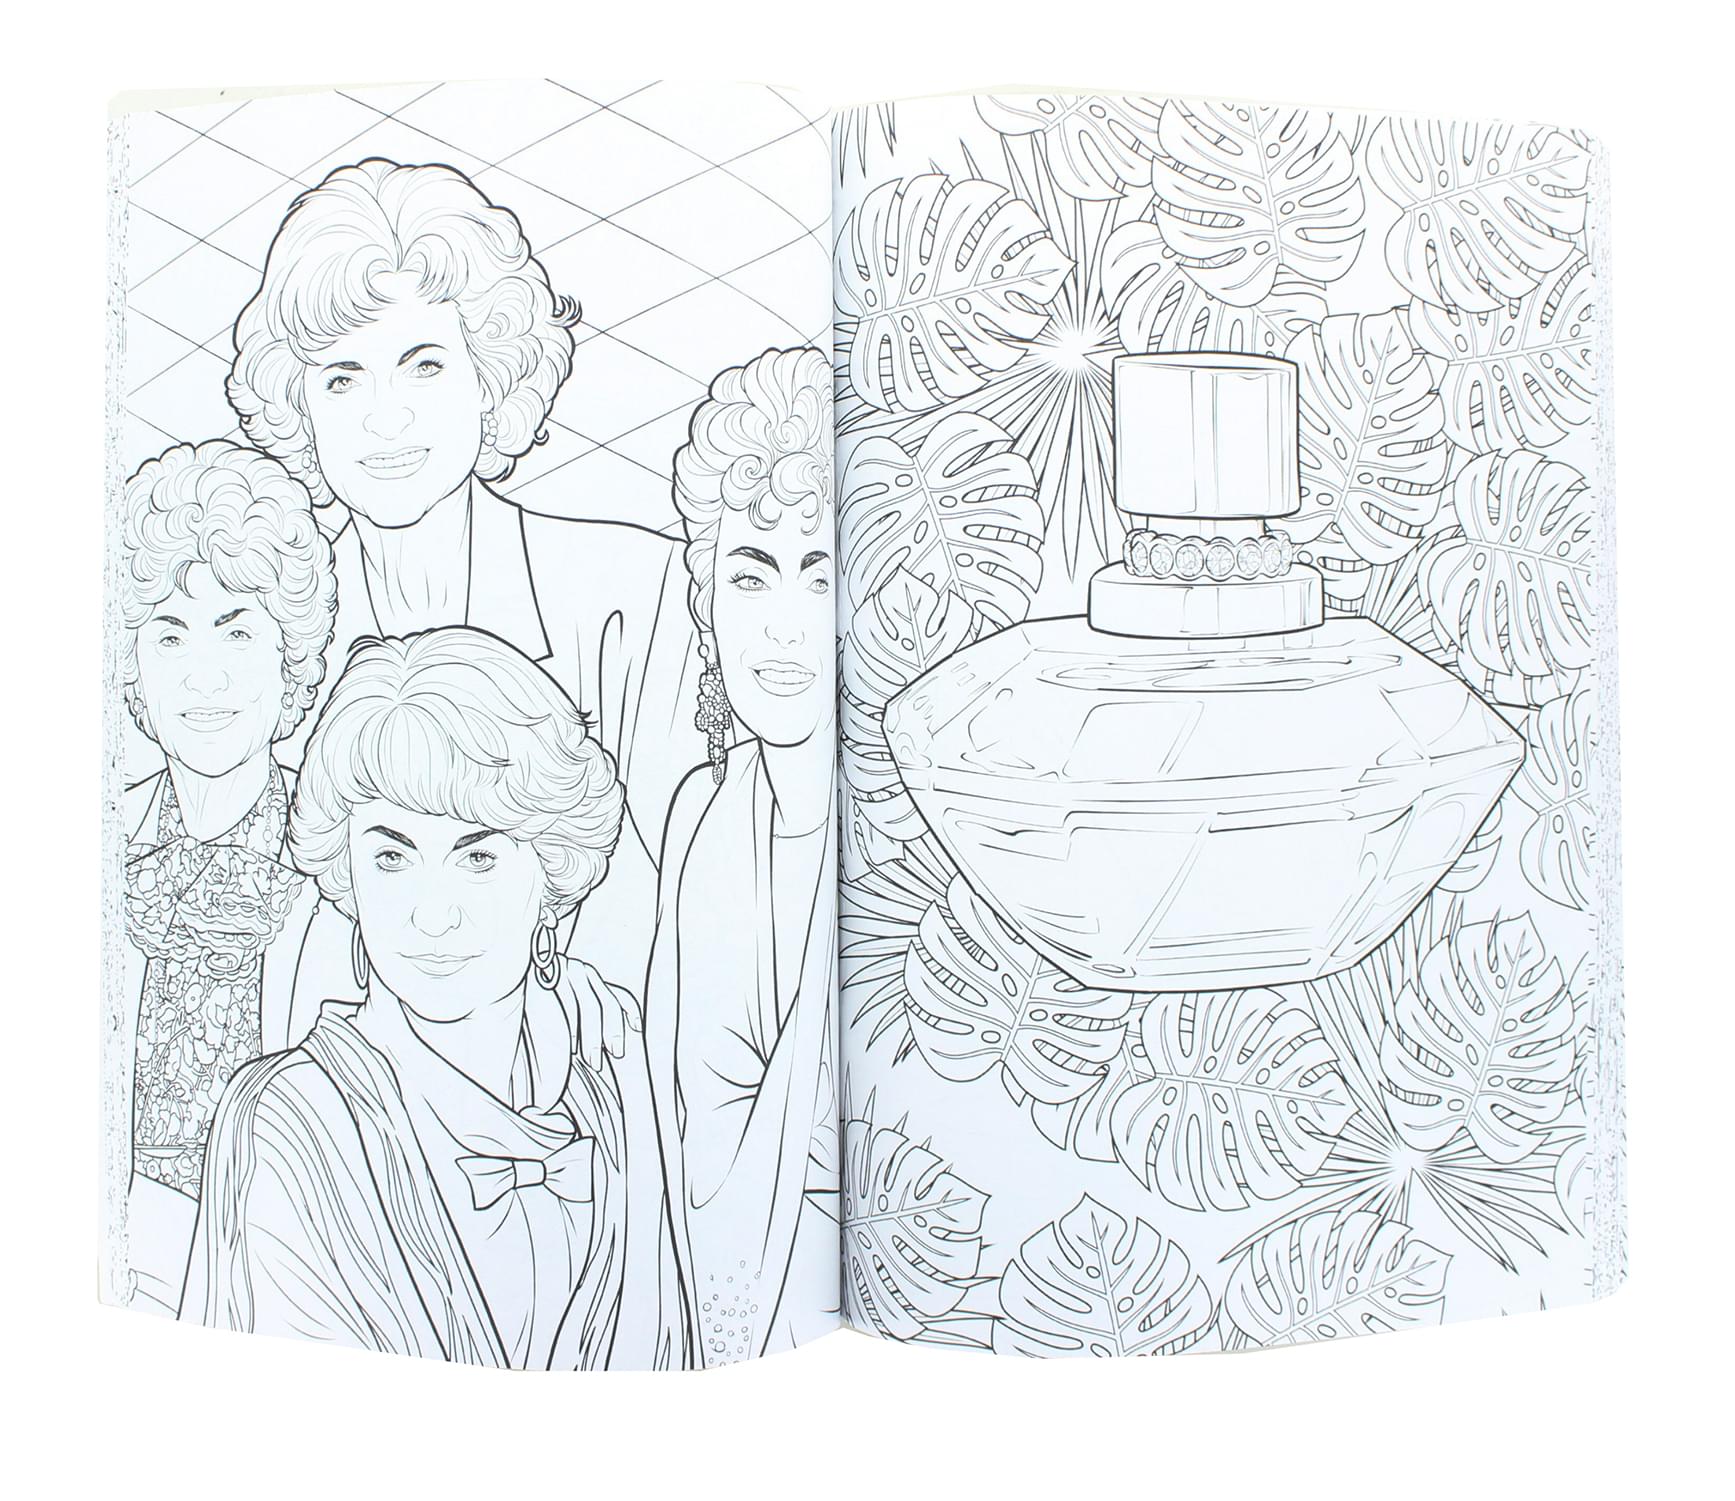 The Golden Girls Art of Coloring Book | 100 Images to Inspire Creativity